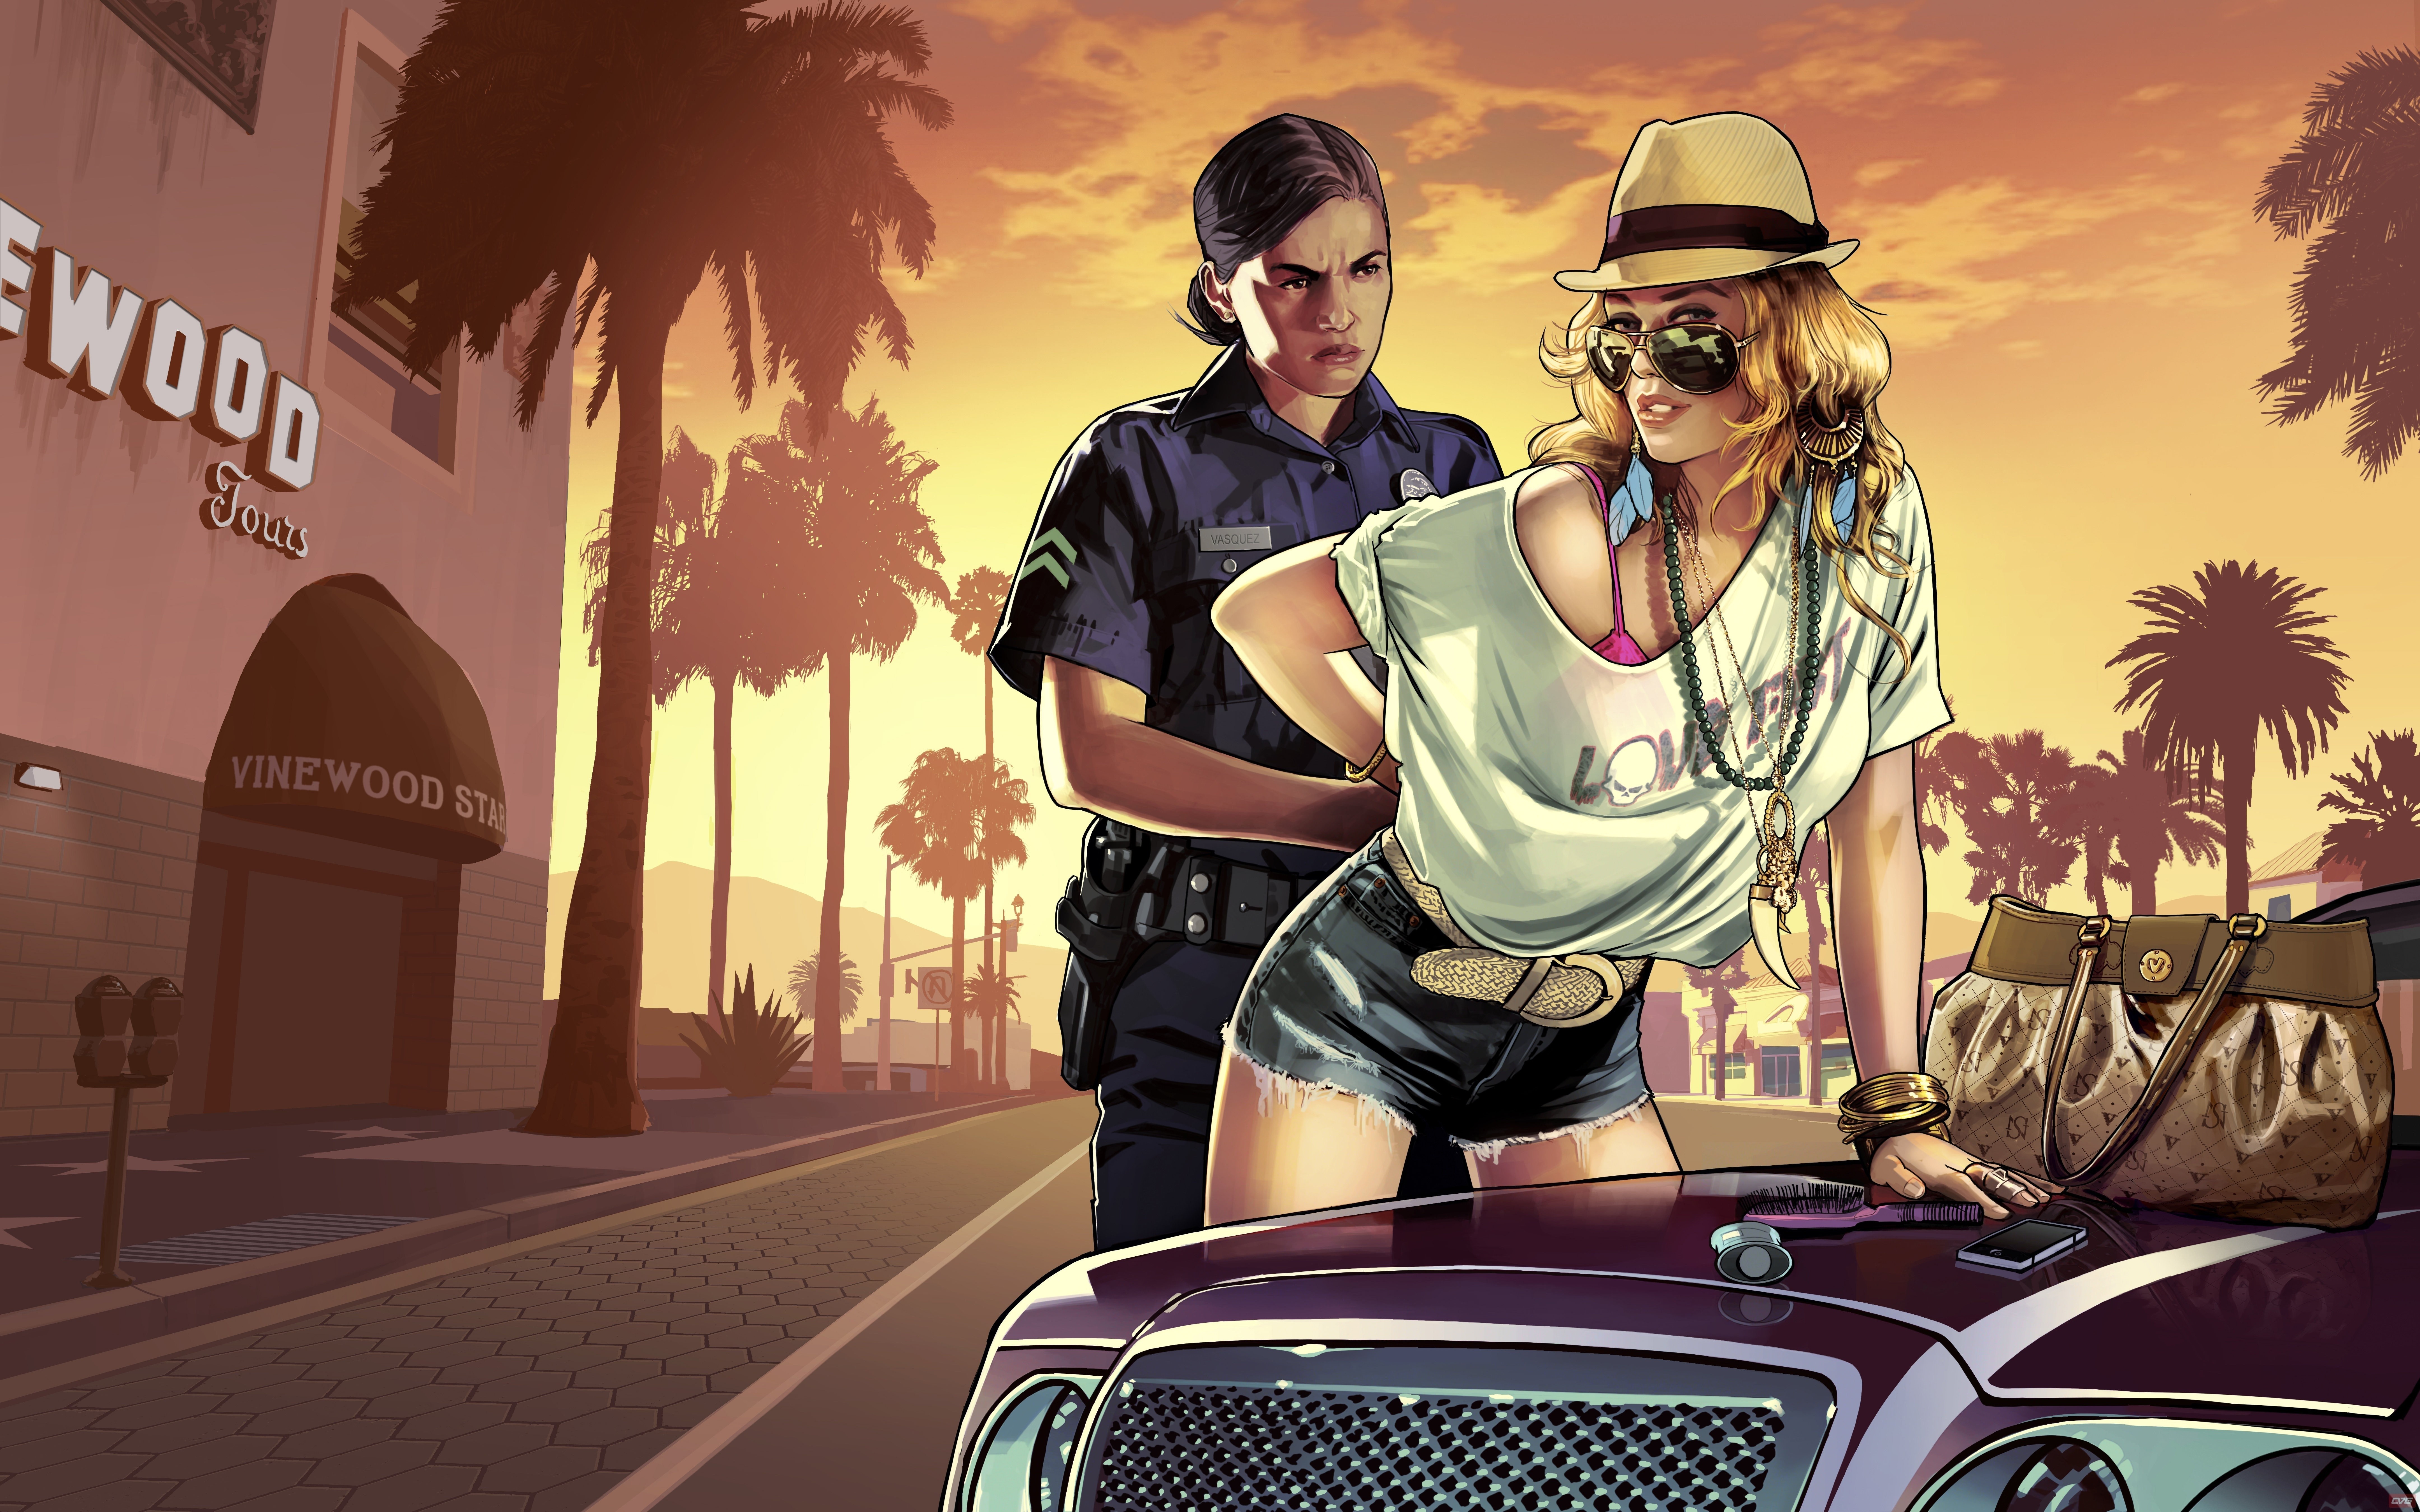 General 8640x5400 Grand Theft Auto V video games video game art hat sunglasses car jean shorts PC gaming women two women video game girls police women women with cars women with shades uniform